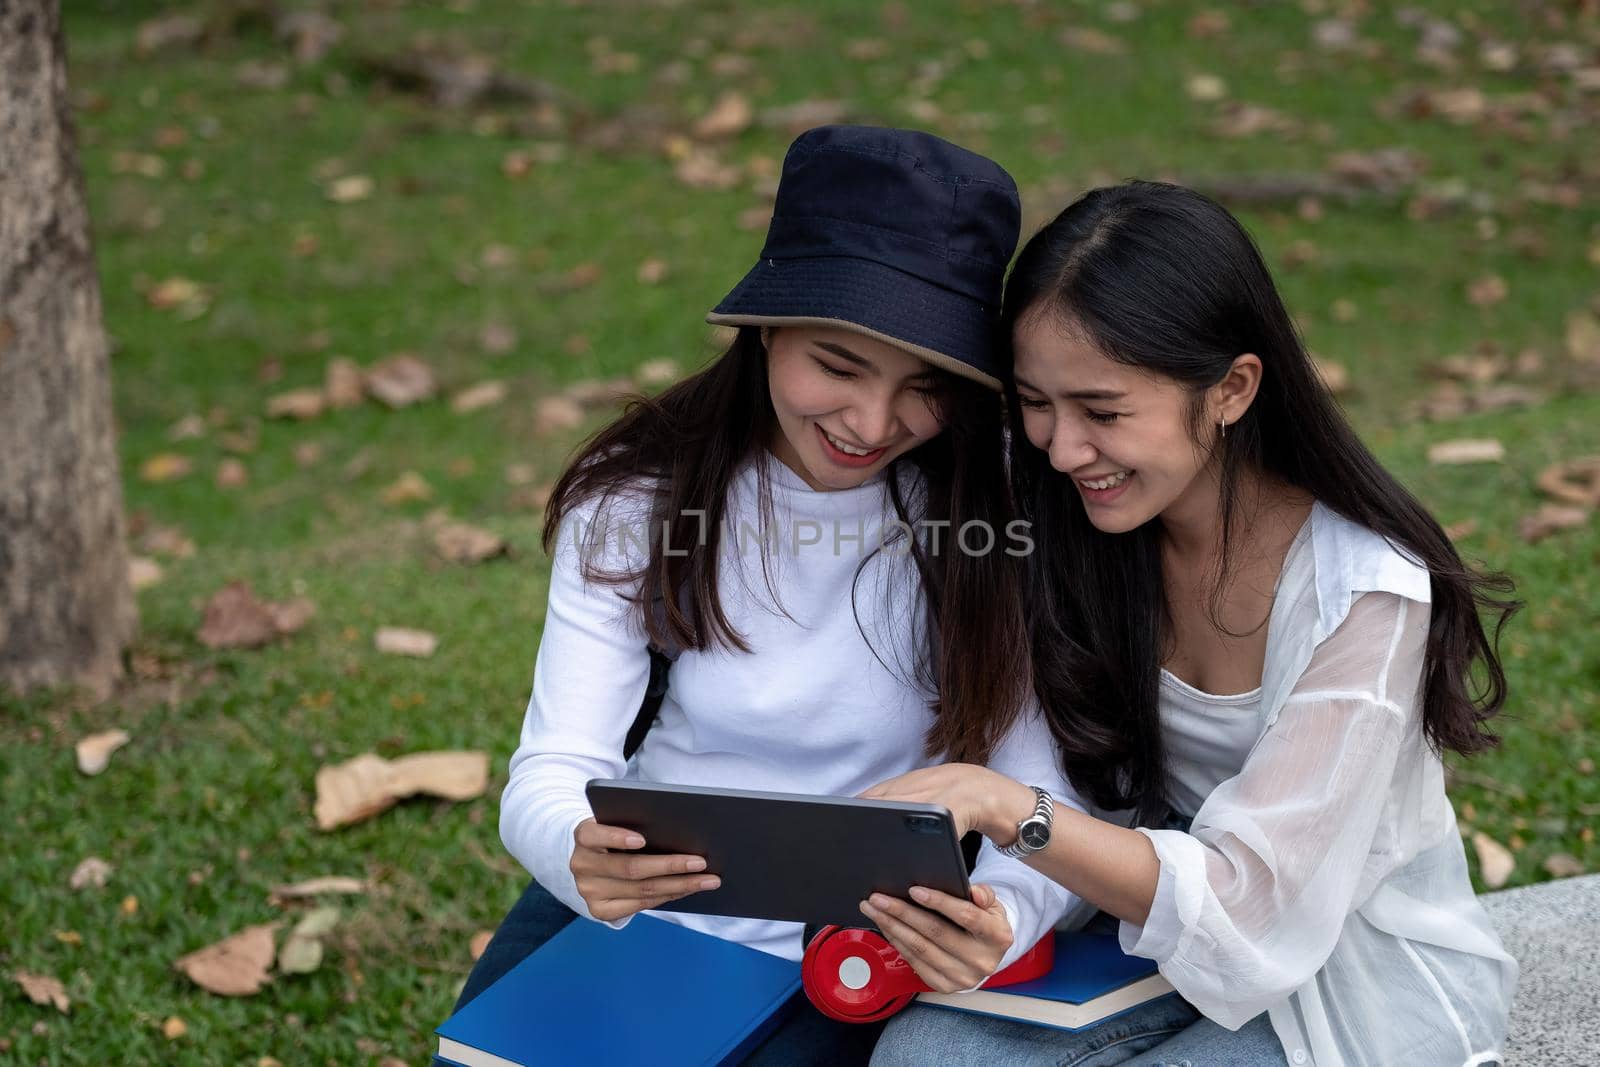 Two female university students outdoor study, using digital tablet together at the park in university.